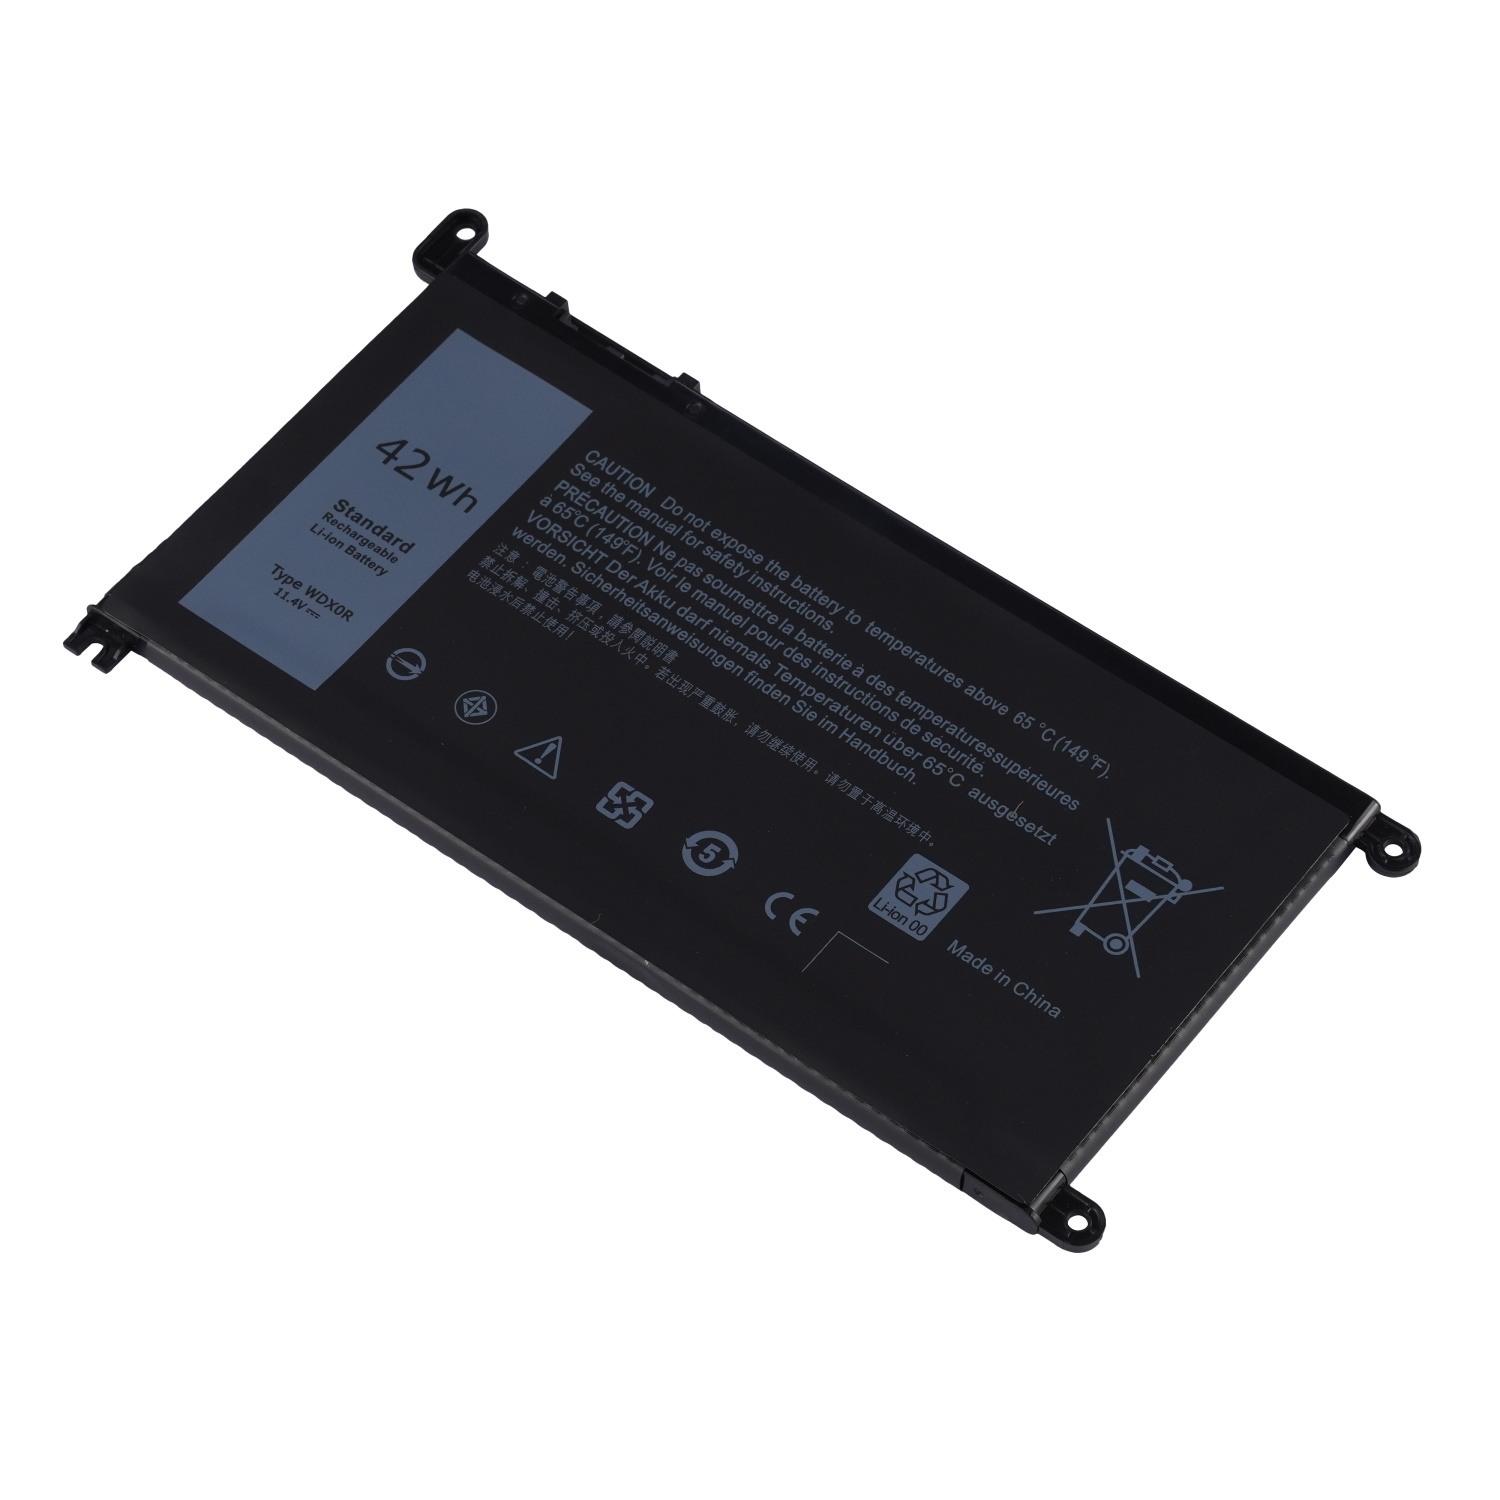 WDXOR rechargeable lithium ion Notebook battery Laptop battery Y3F7Y 3CRH3 T2JX4 11.4V 42Wh for Dell laptop Inspiron 7460 7560 13-5368 13-5378